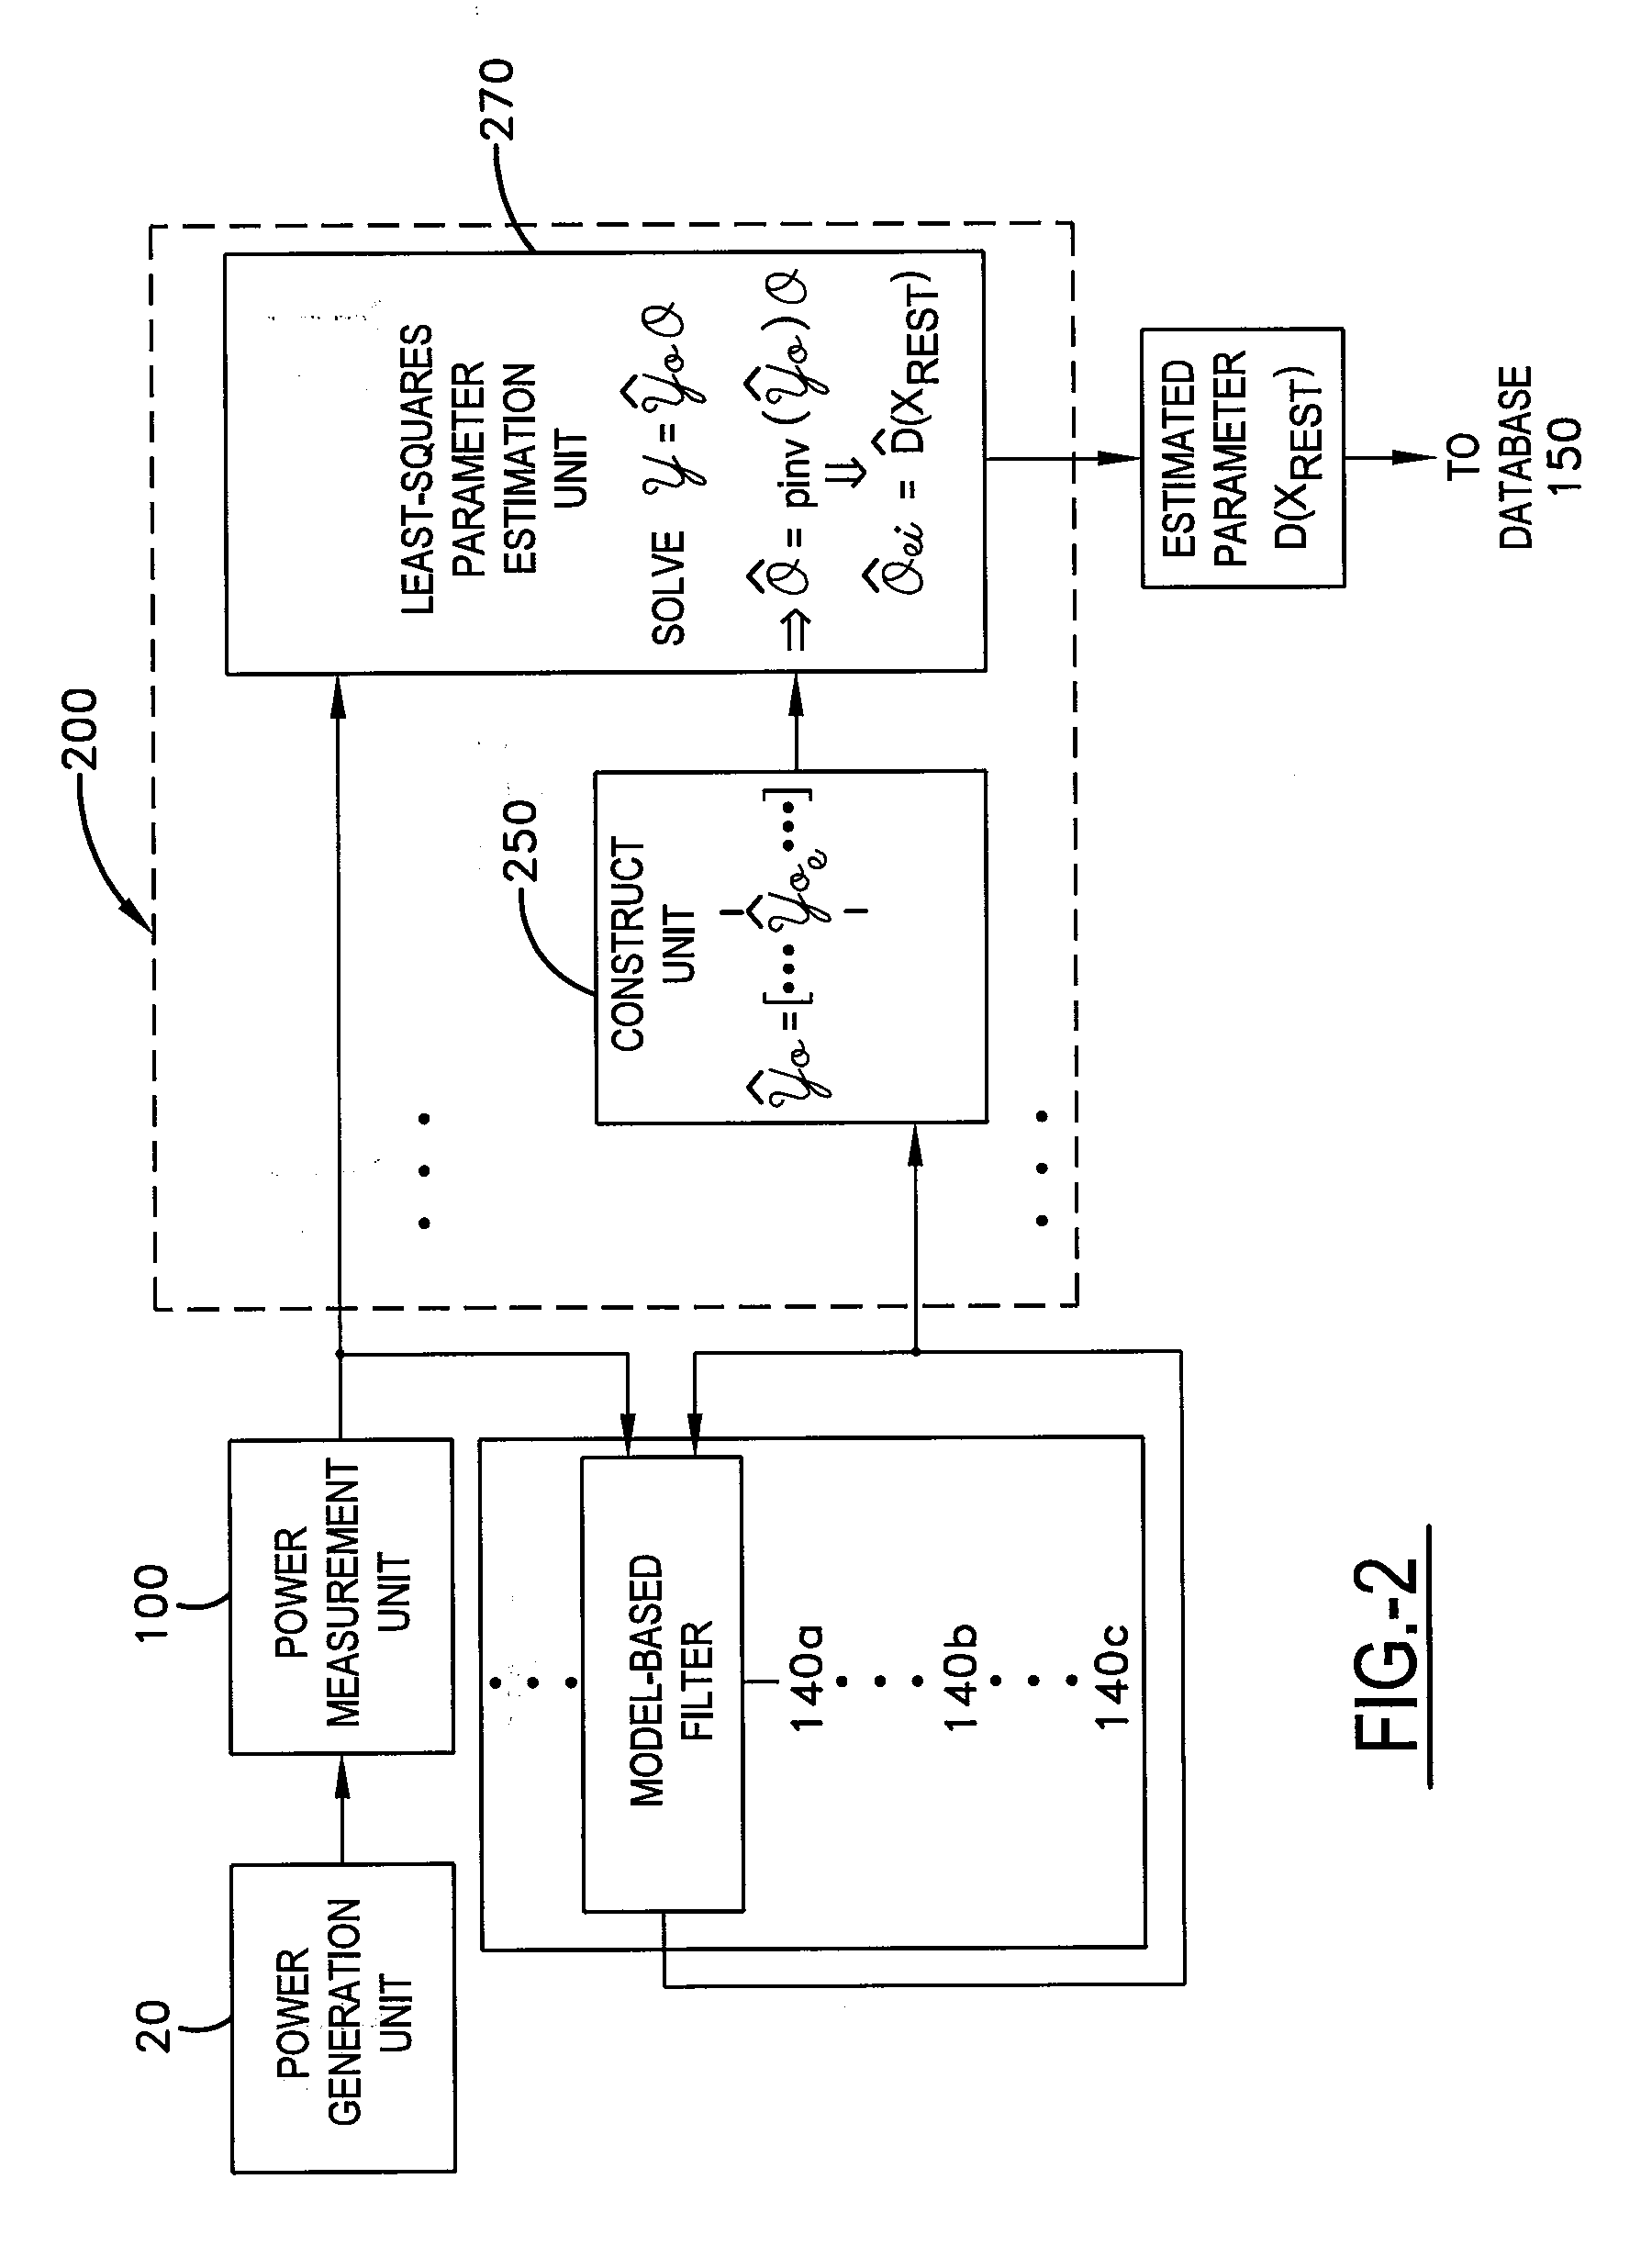 System and method for monitoring power damping compliance of a power generation unit